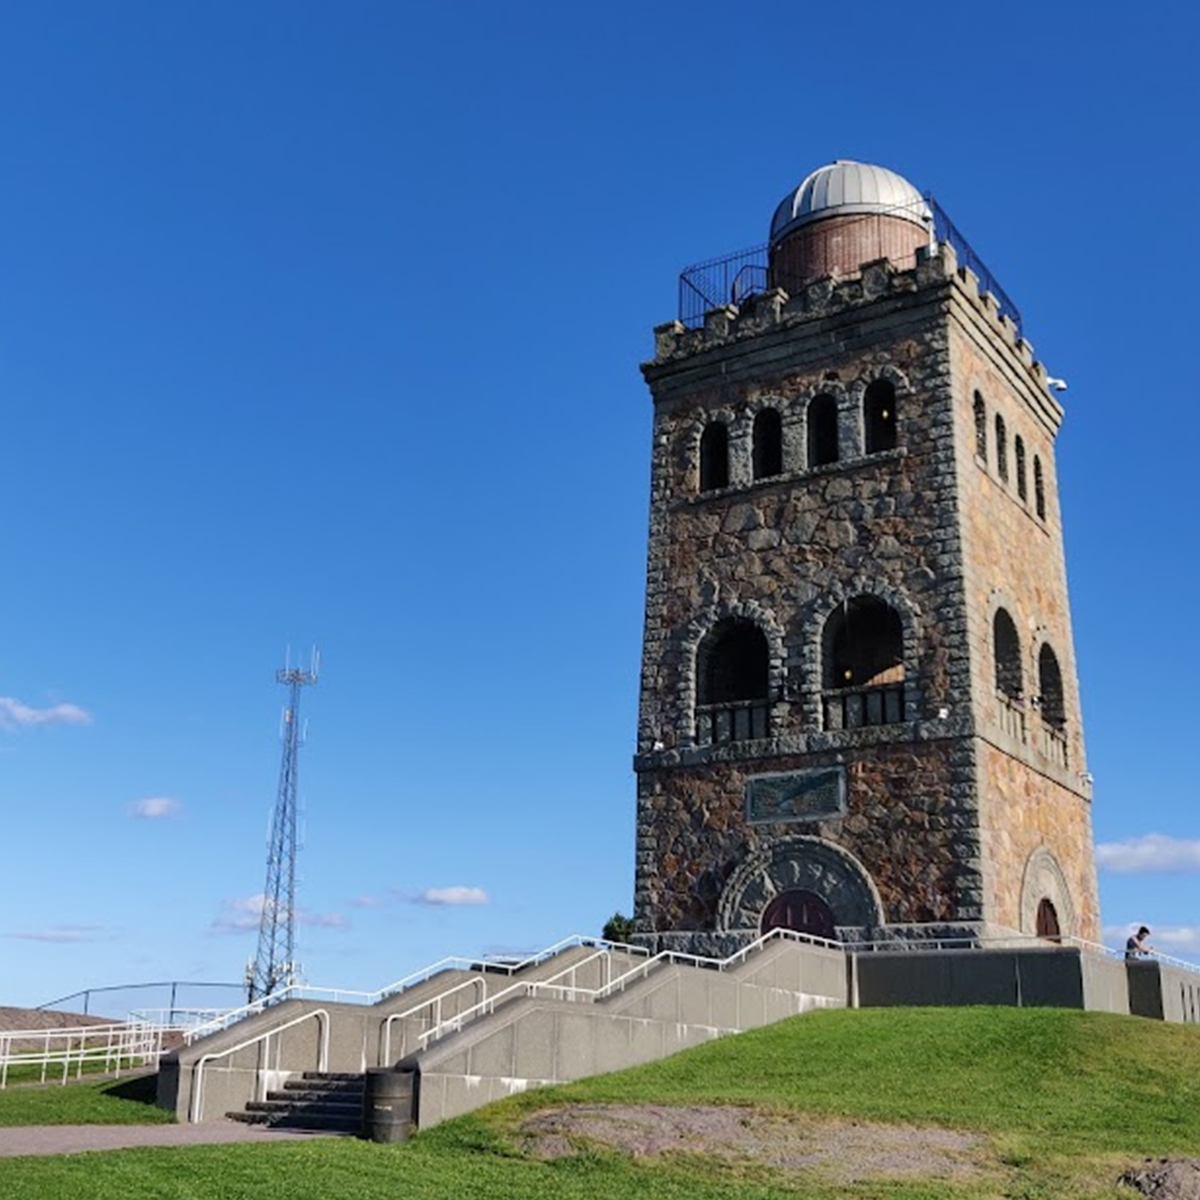 a tall tower with a dome on top of it.